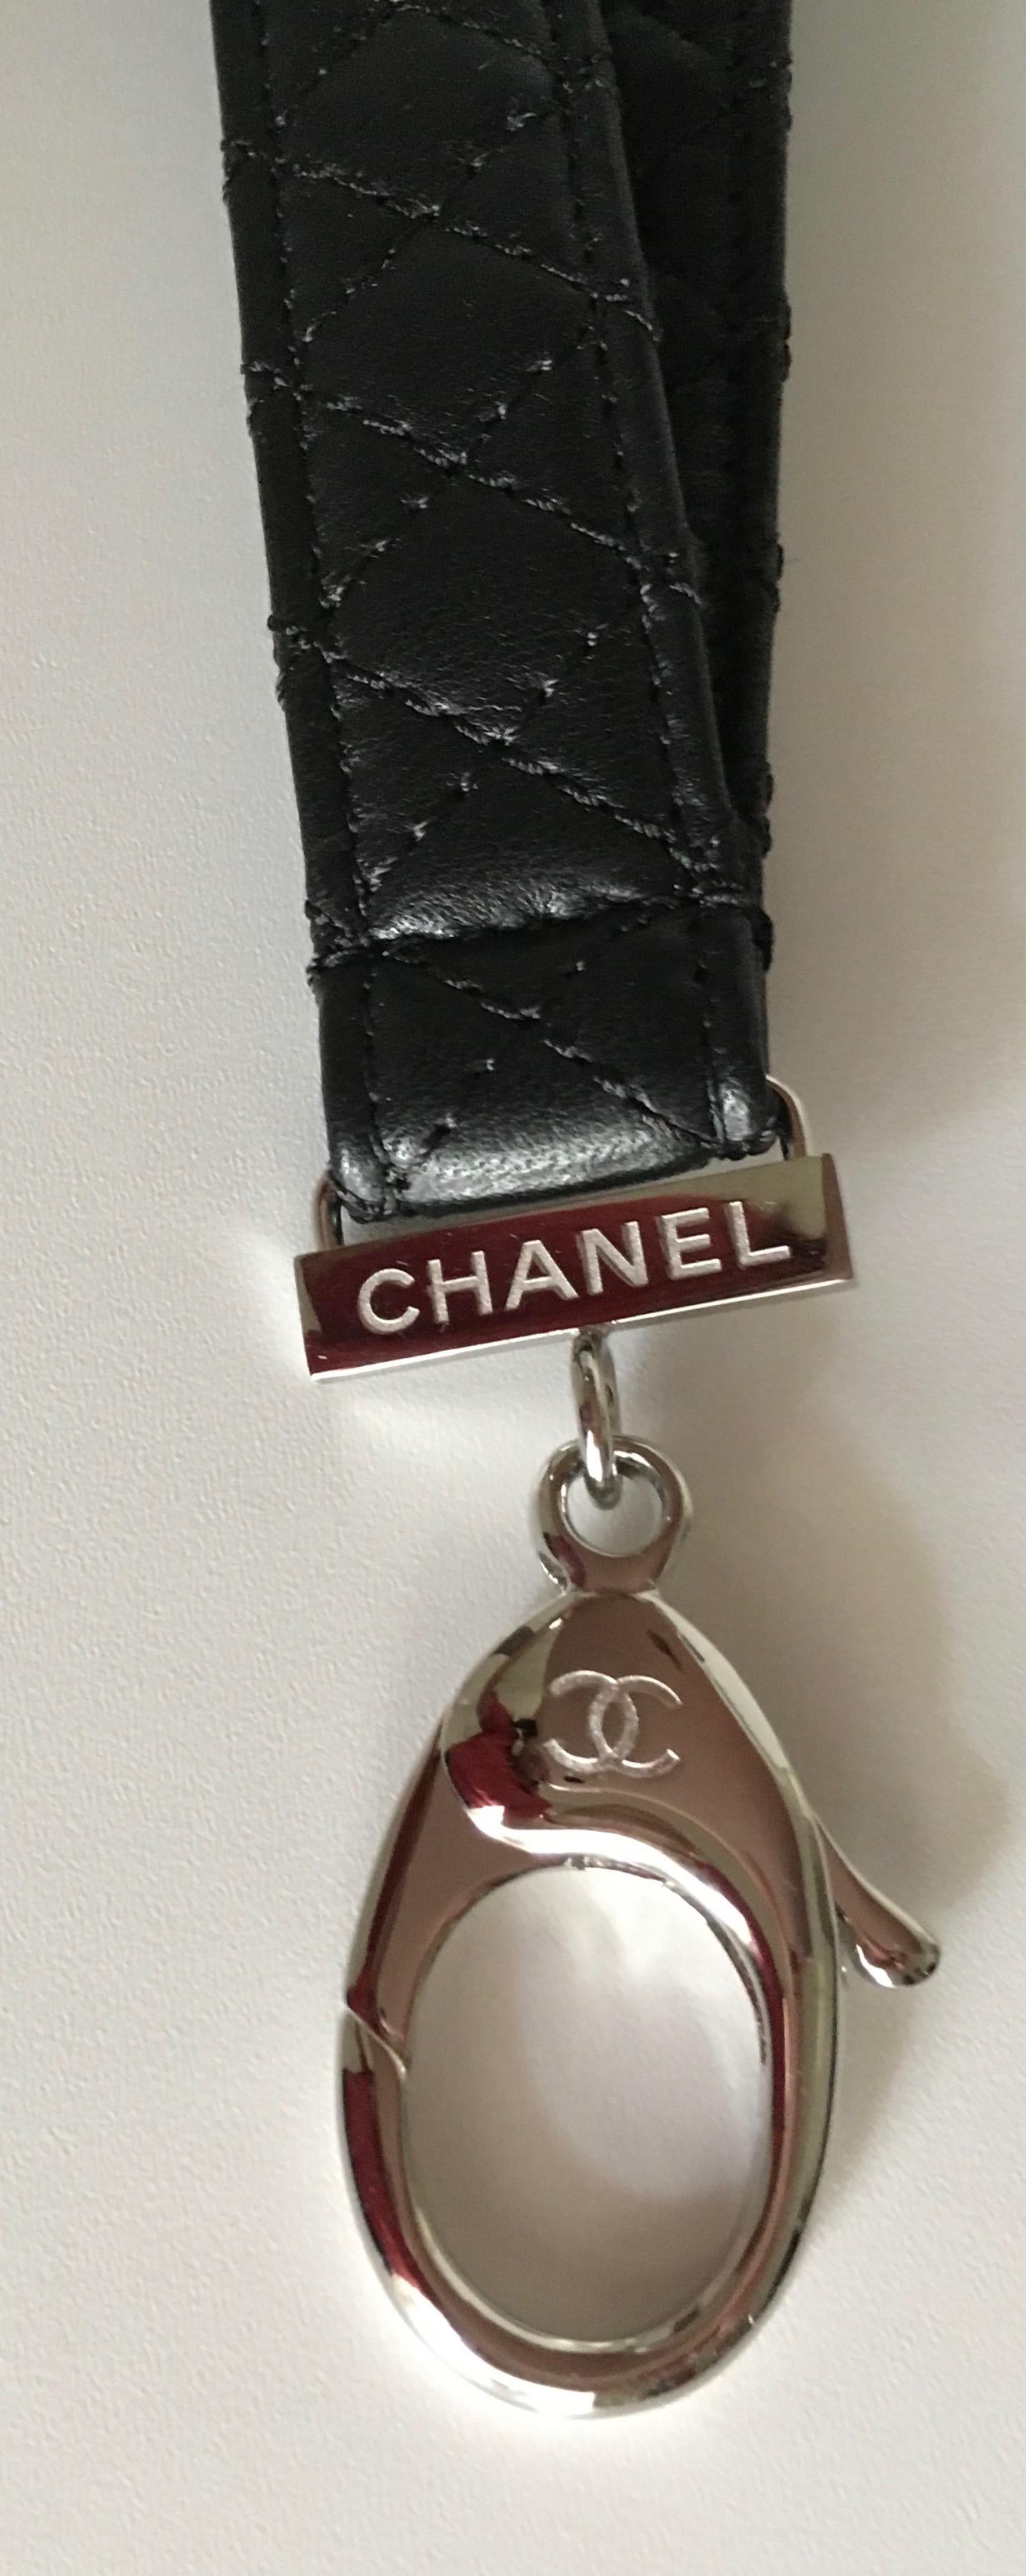 Presented here is a beautiful new Chanel Lariat. It is available in silver tone or gold tone.
the 3/4 inches wide leather necklace part measures 30 inches long. The clip on piece attached measures  another 2 inches.